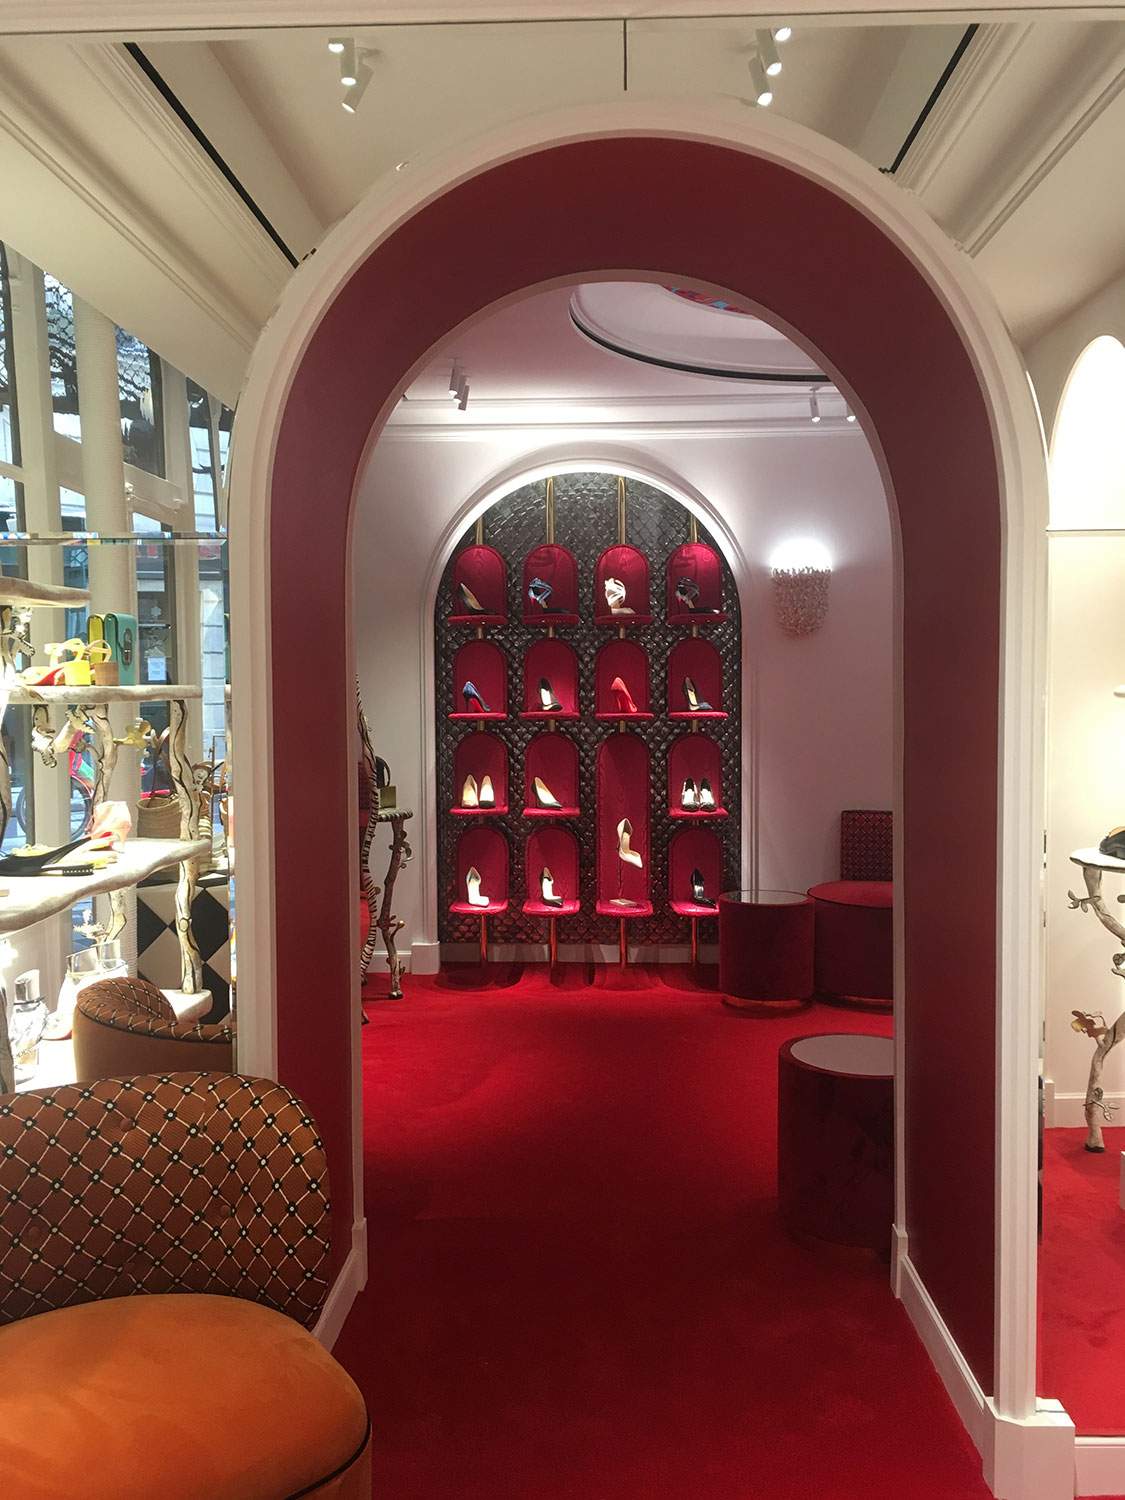 Arch made of fibrous plaster in the Louboutin women's boutique in Paris